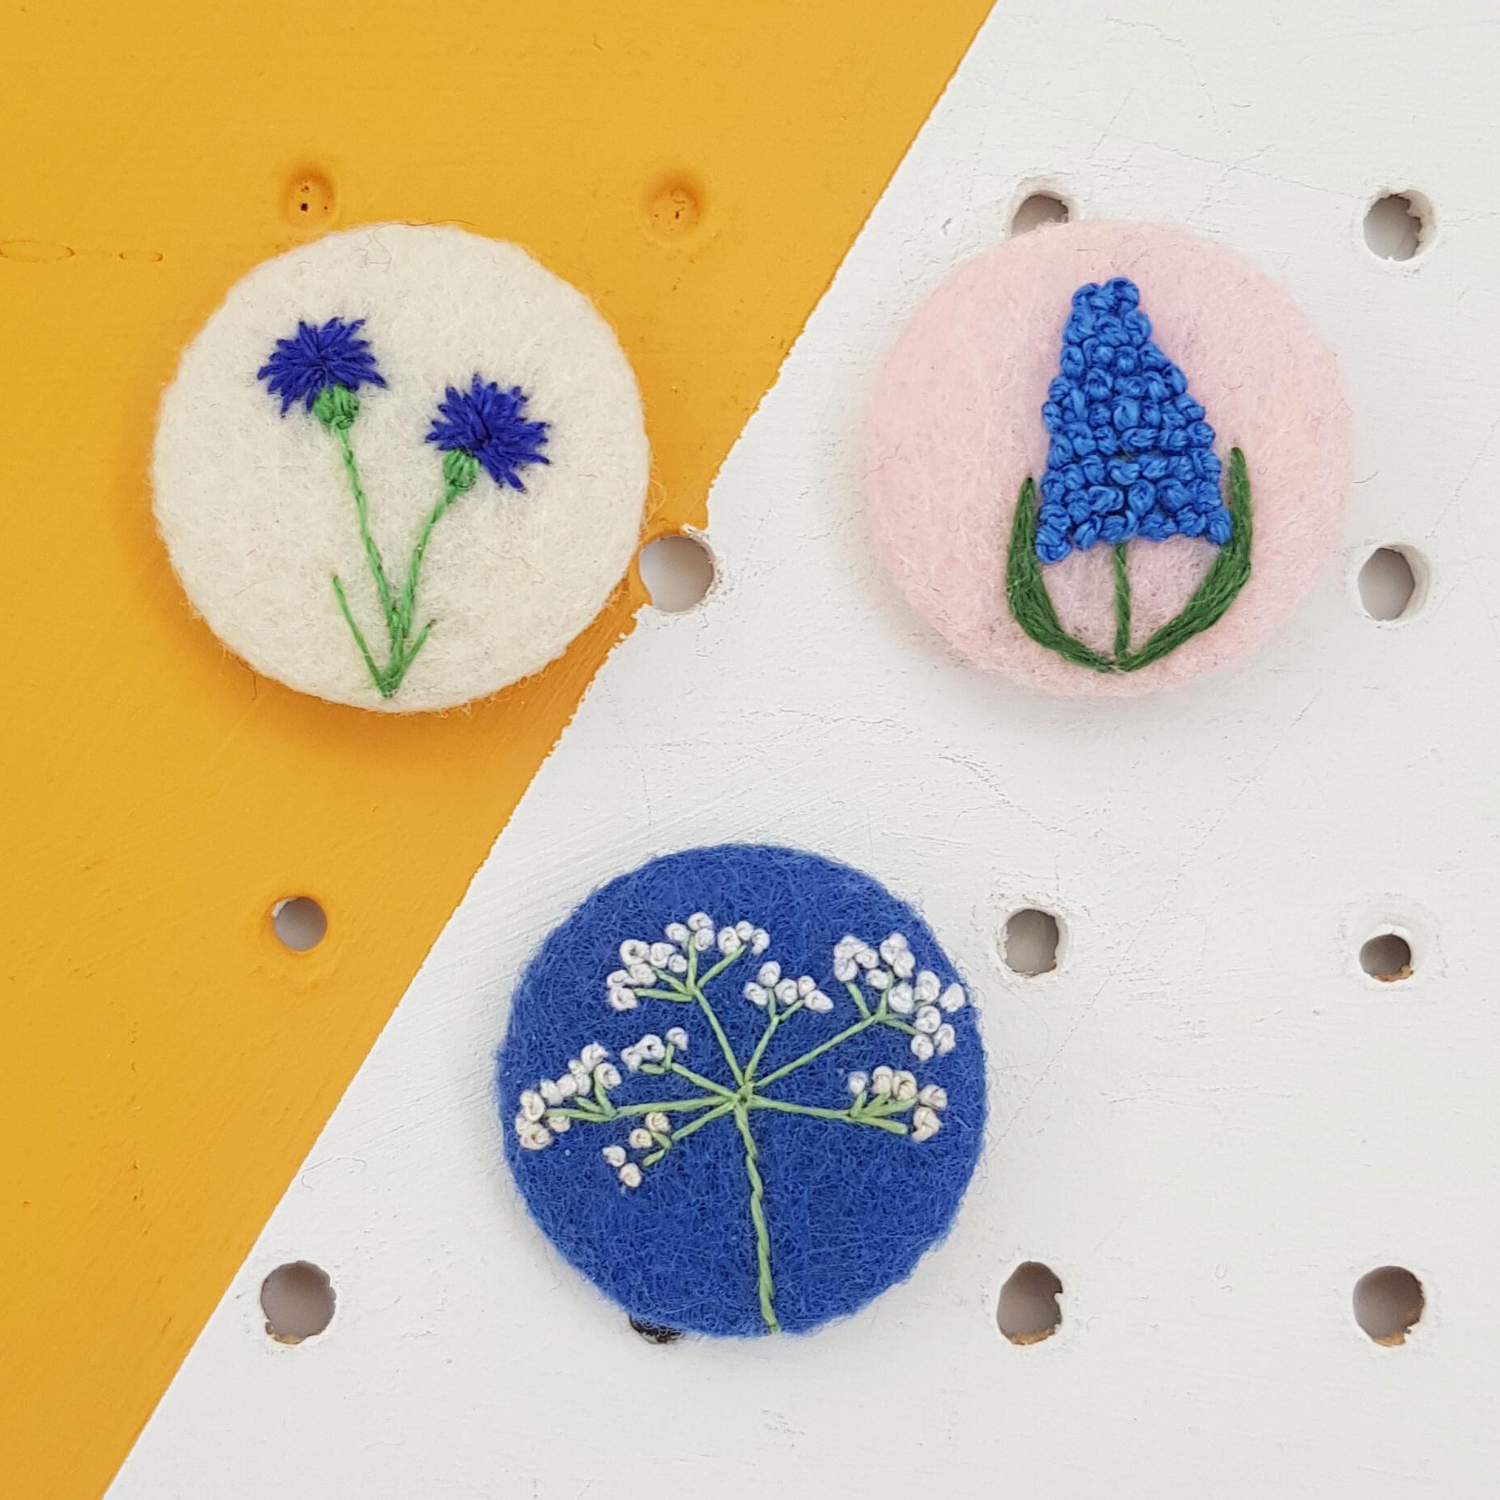 embroidered floral badges - cornflower, cow parsley and grape hyacinth